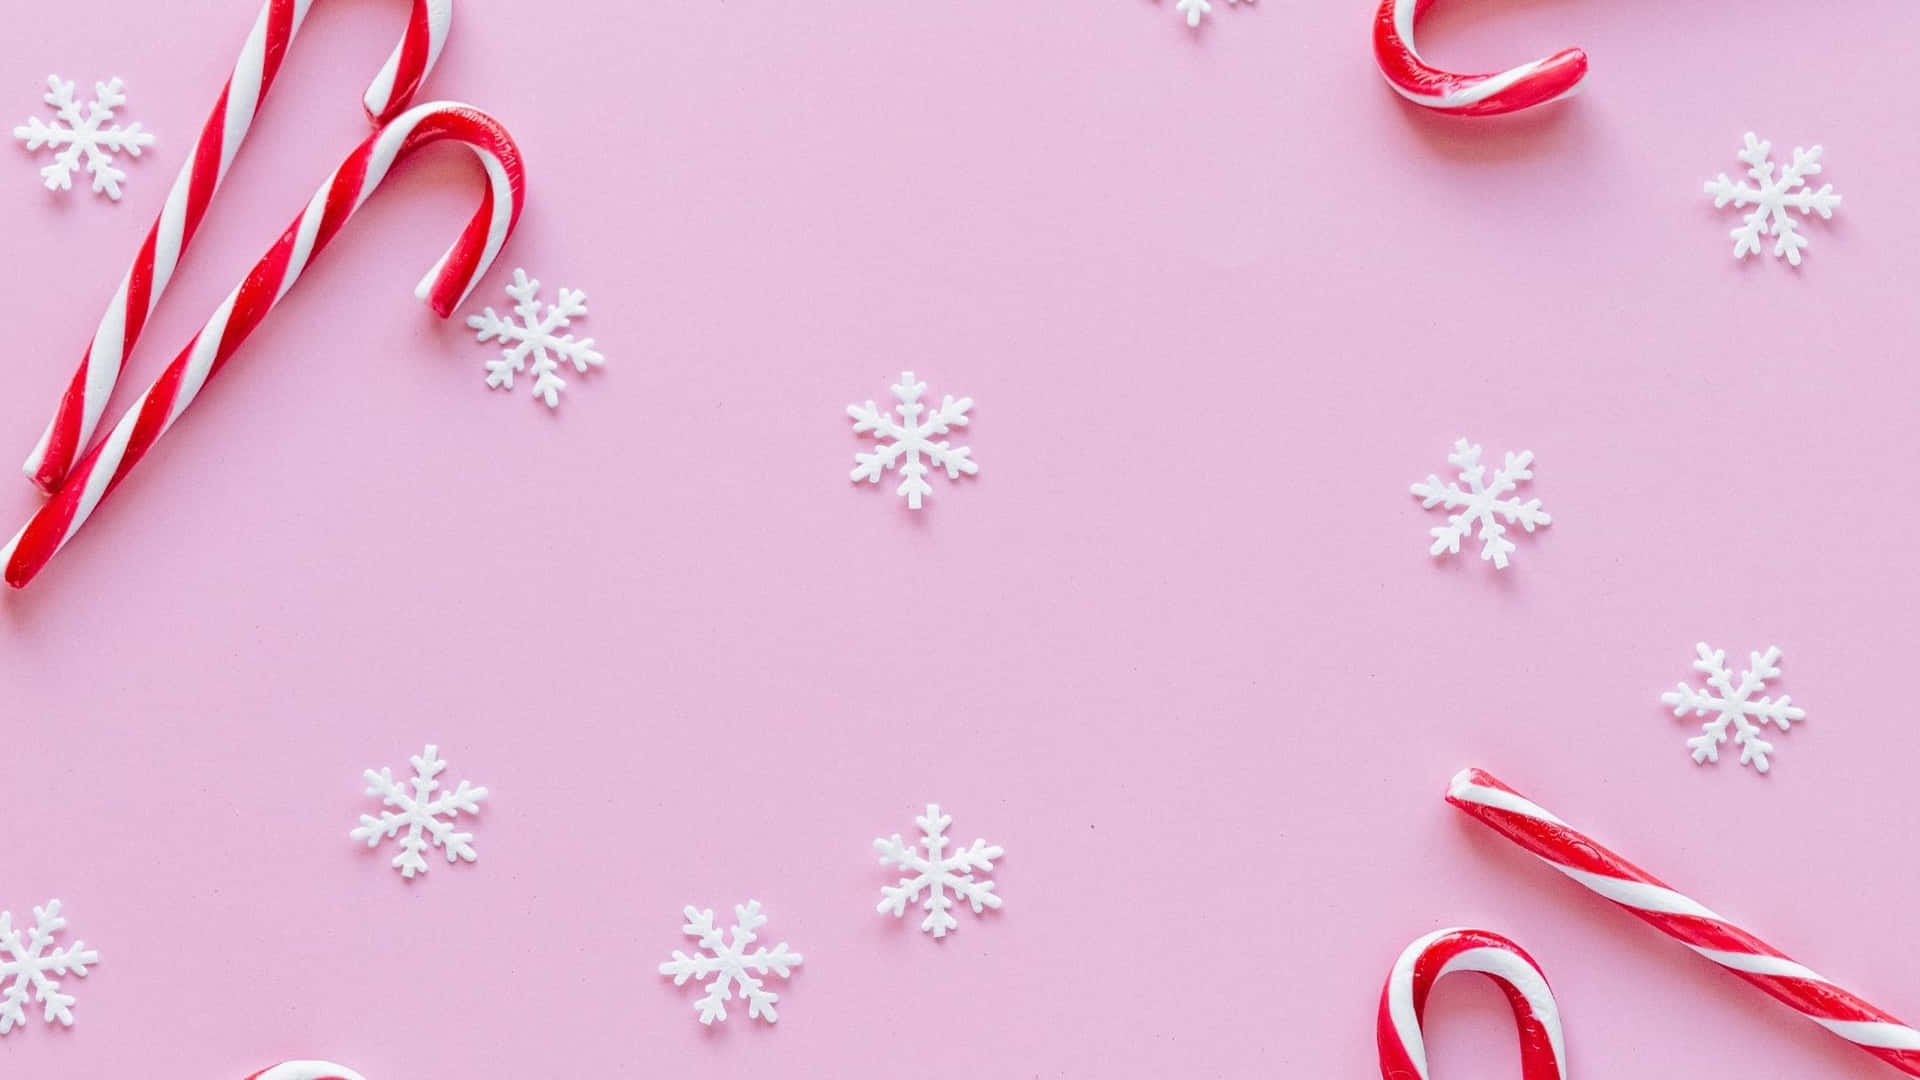 Candy Canes And Snowflakes On A Pink Background